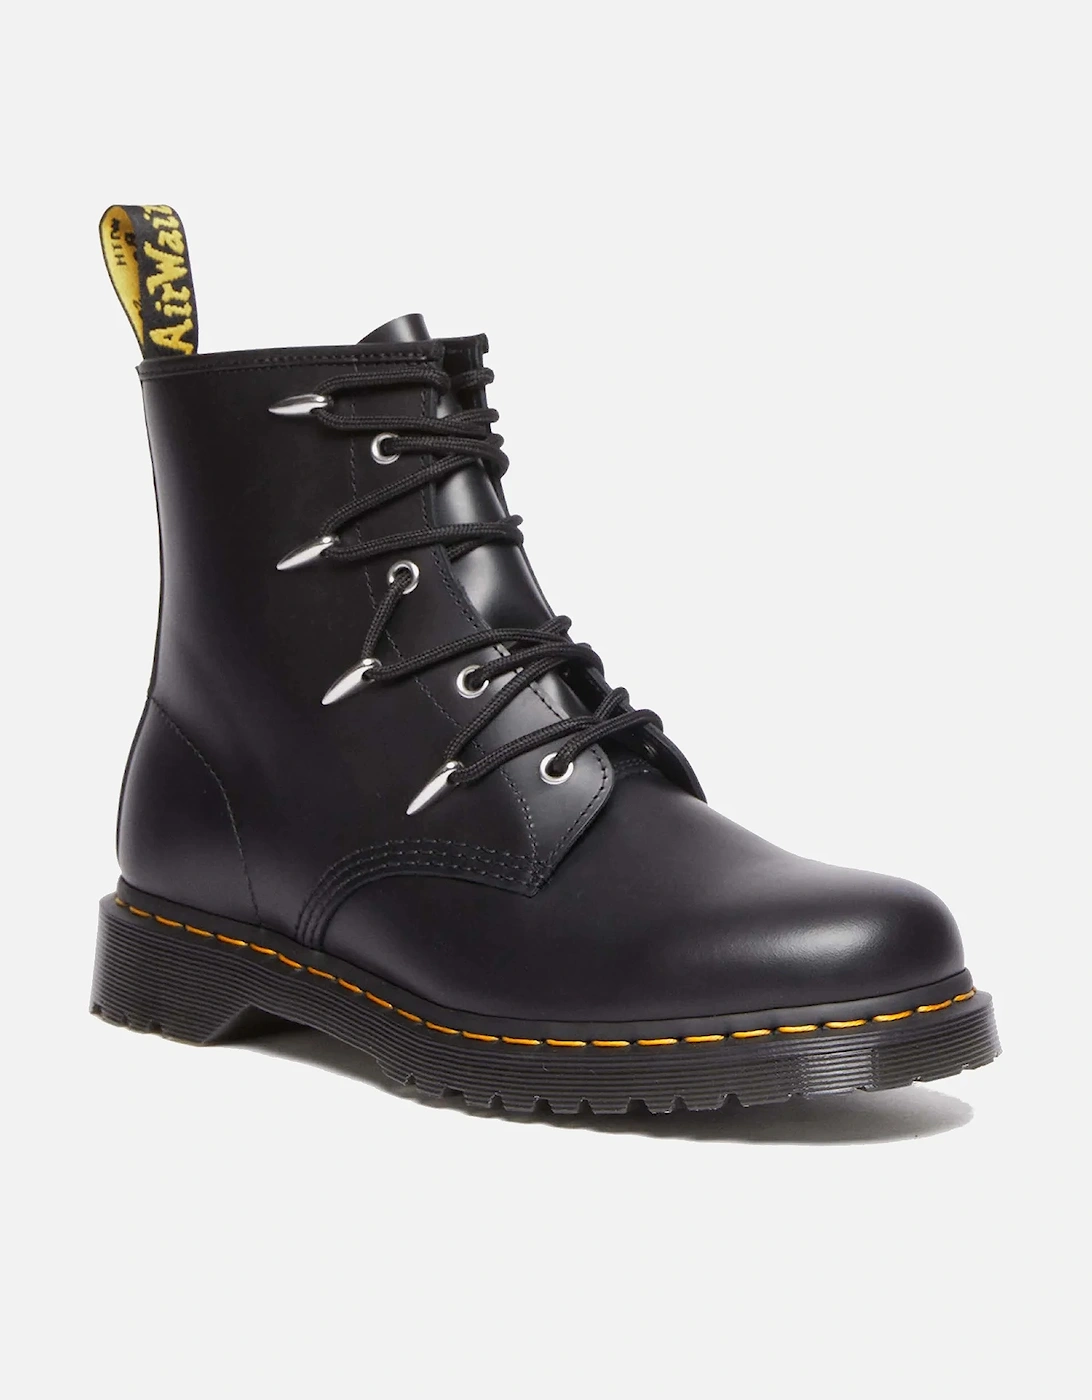 Dr. Martens Women's 1460 Leather 8-Eye Boots - Dr. Martens - Home - Dr. Martens Women's 1460 Leather 8-Eye Boots, 2 of 1